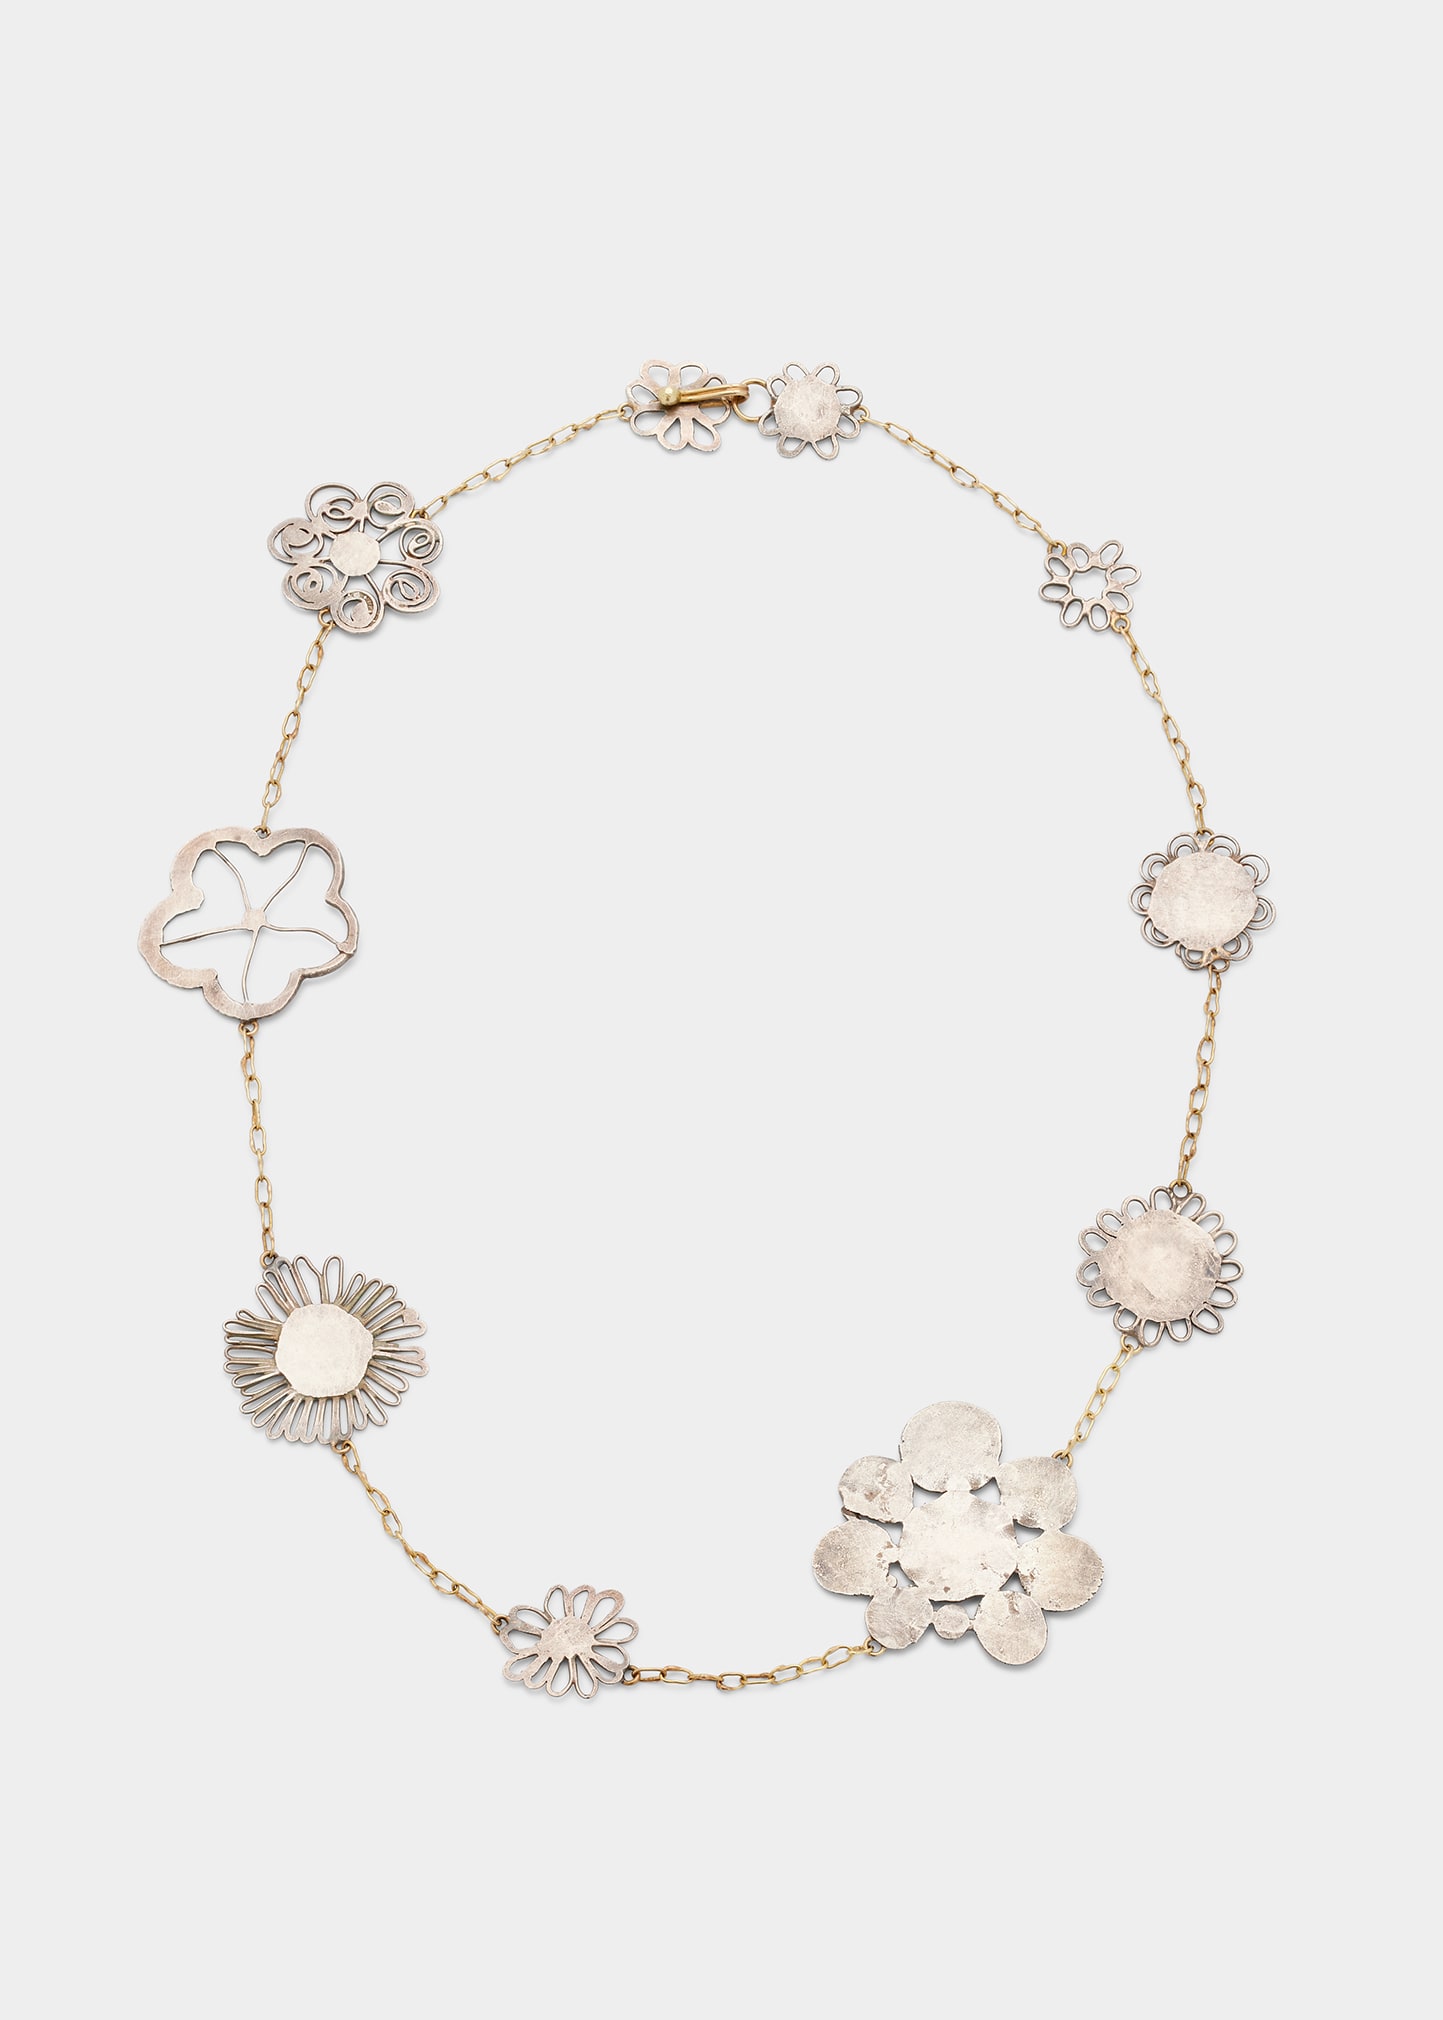 JUDY GEIB Erewhon Tea-Length Necklace in Silver and 18K Gold